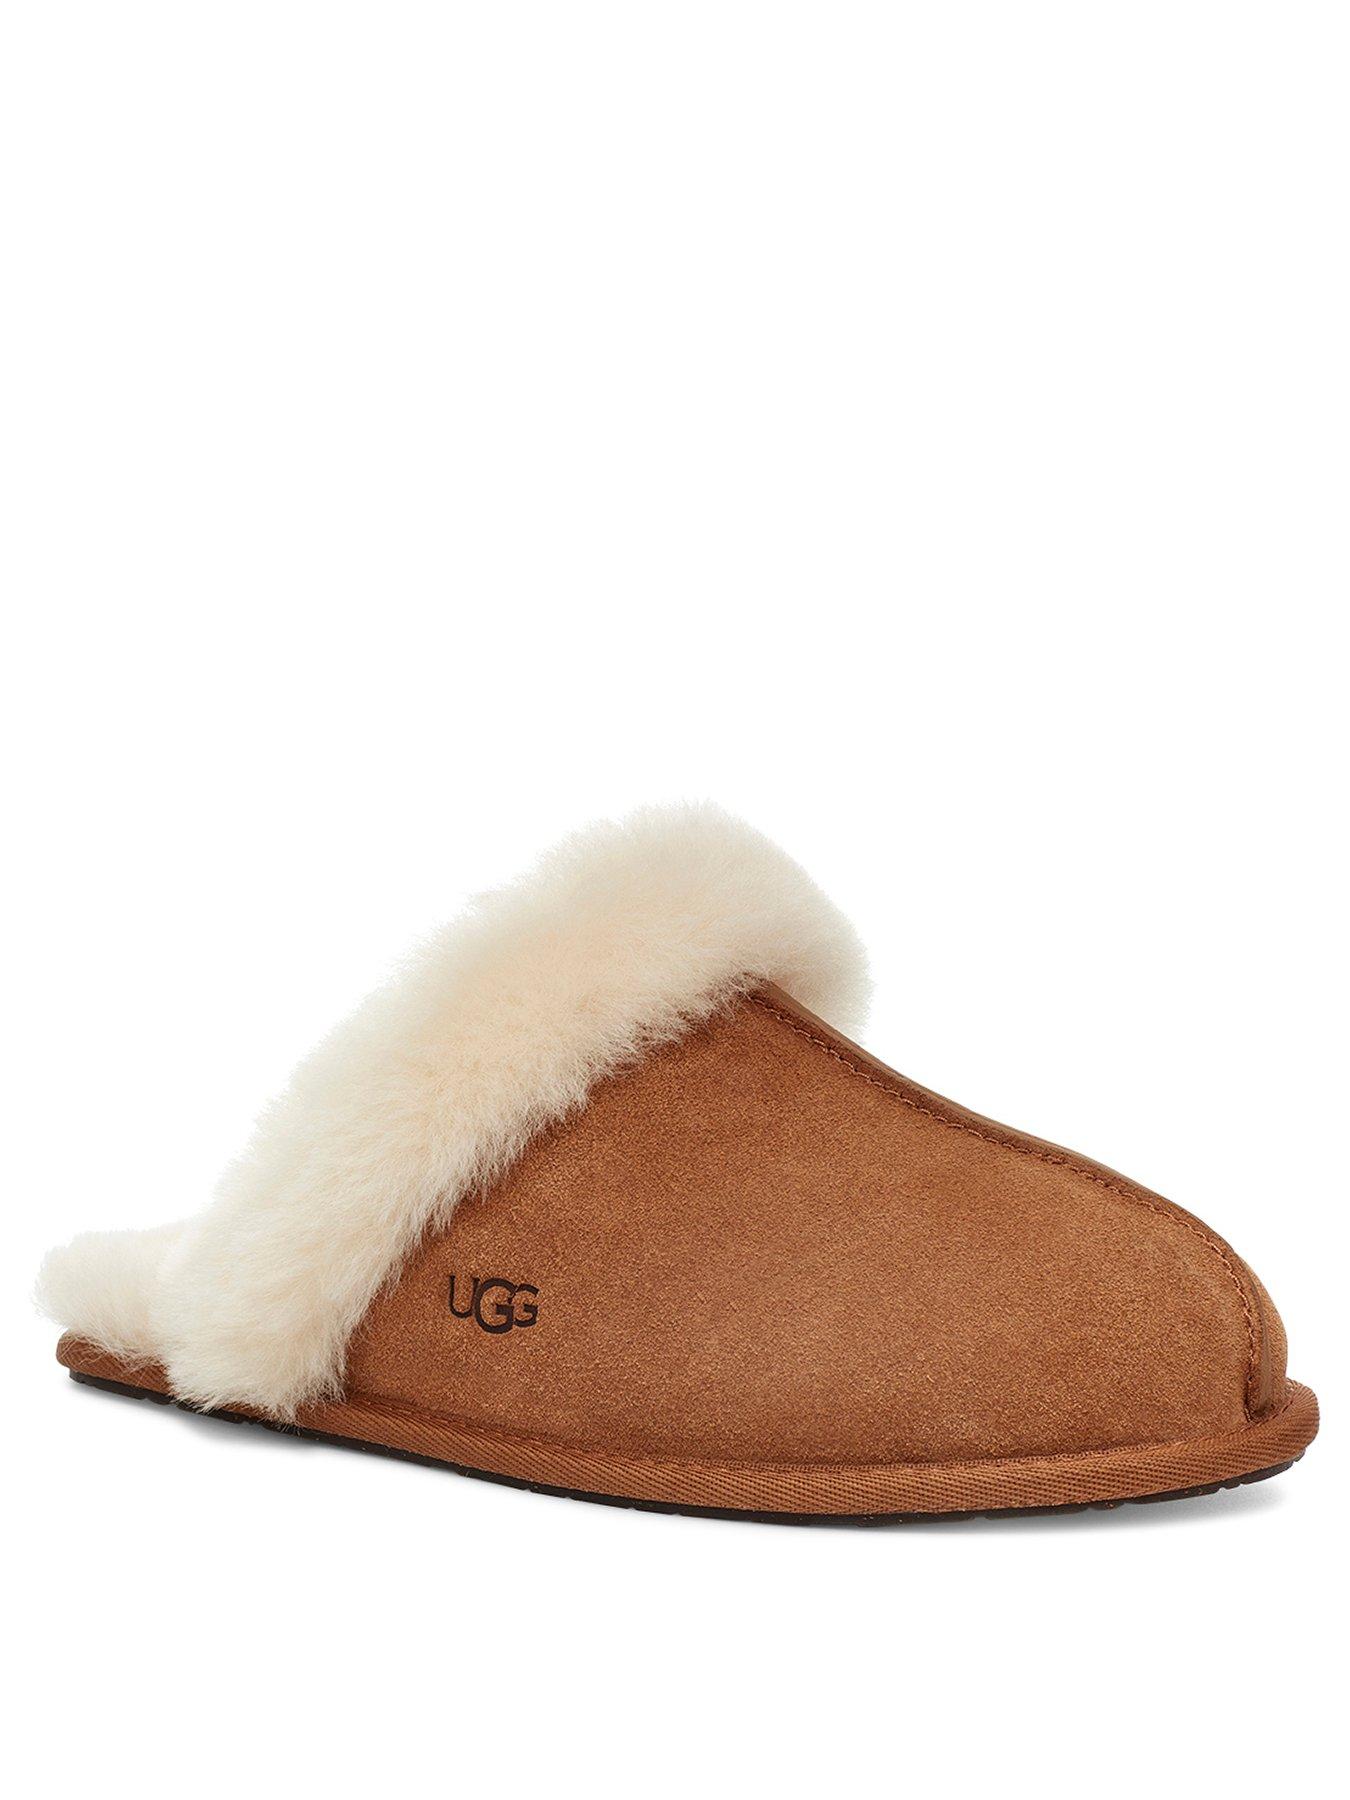 ugg boots buy now pay later